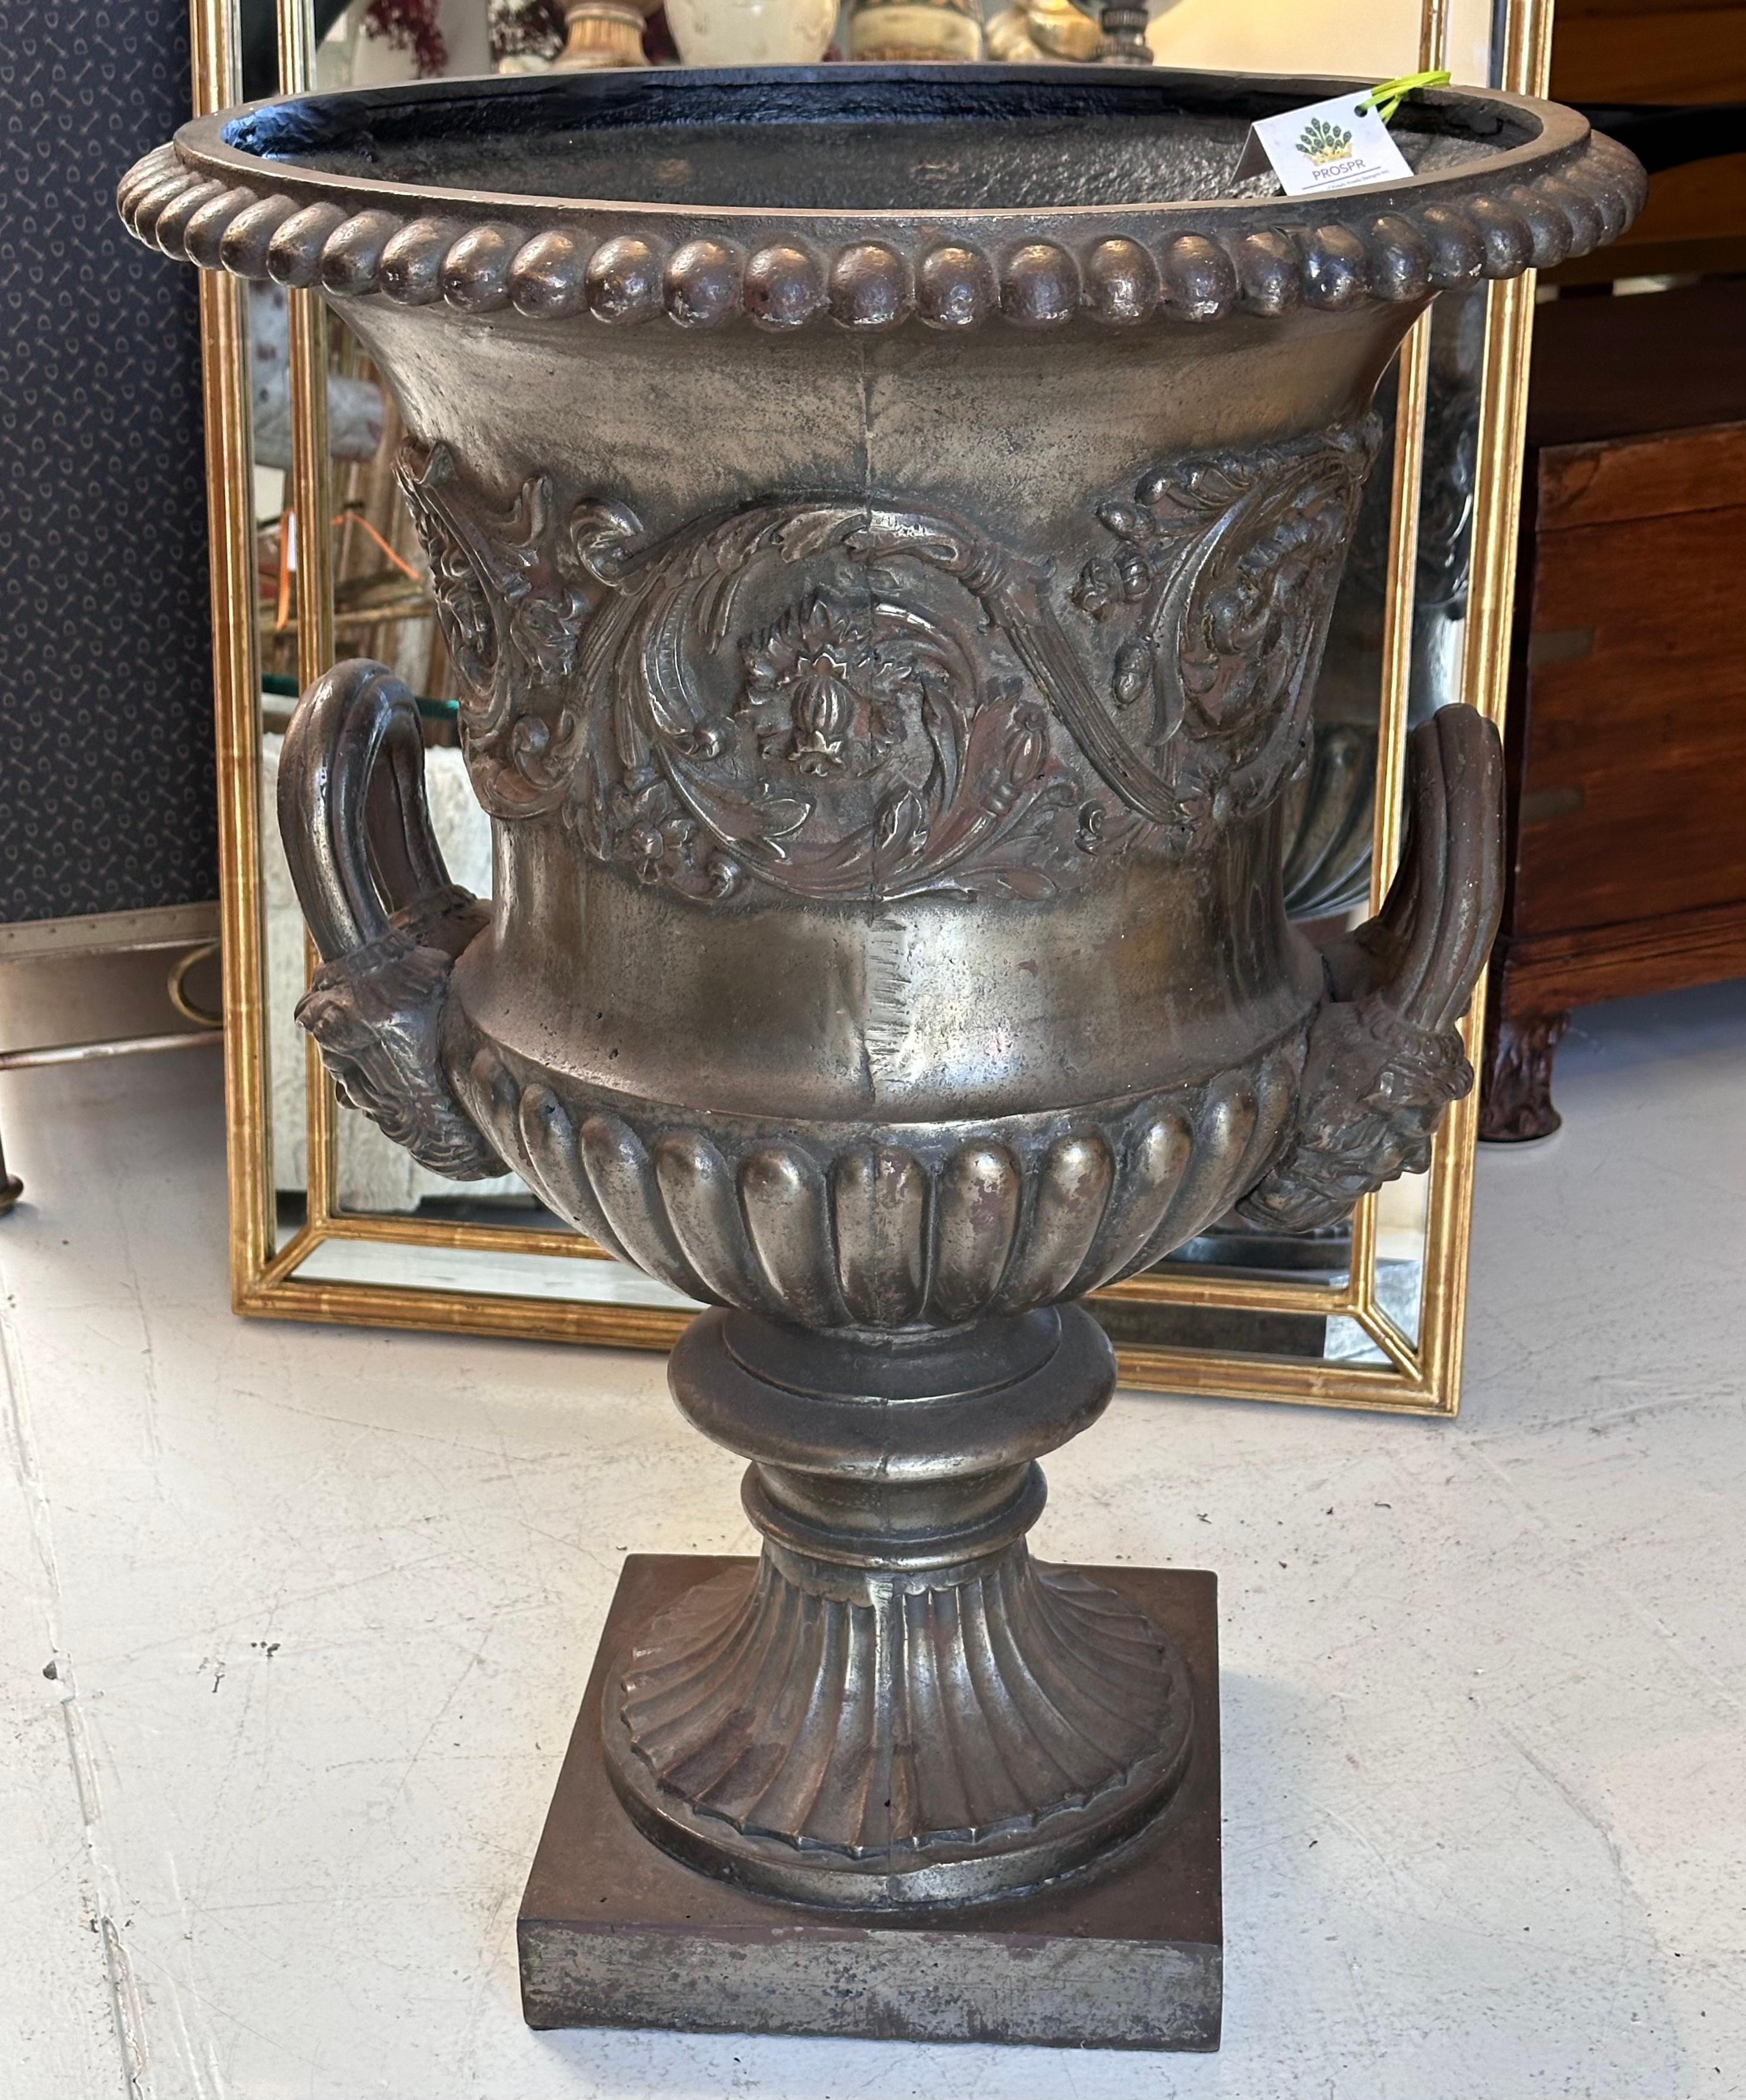 Early 20th Century Huge Antique Silvered Metal Campaigns Urn Planter - Barbara Lockhart Estate For Sale